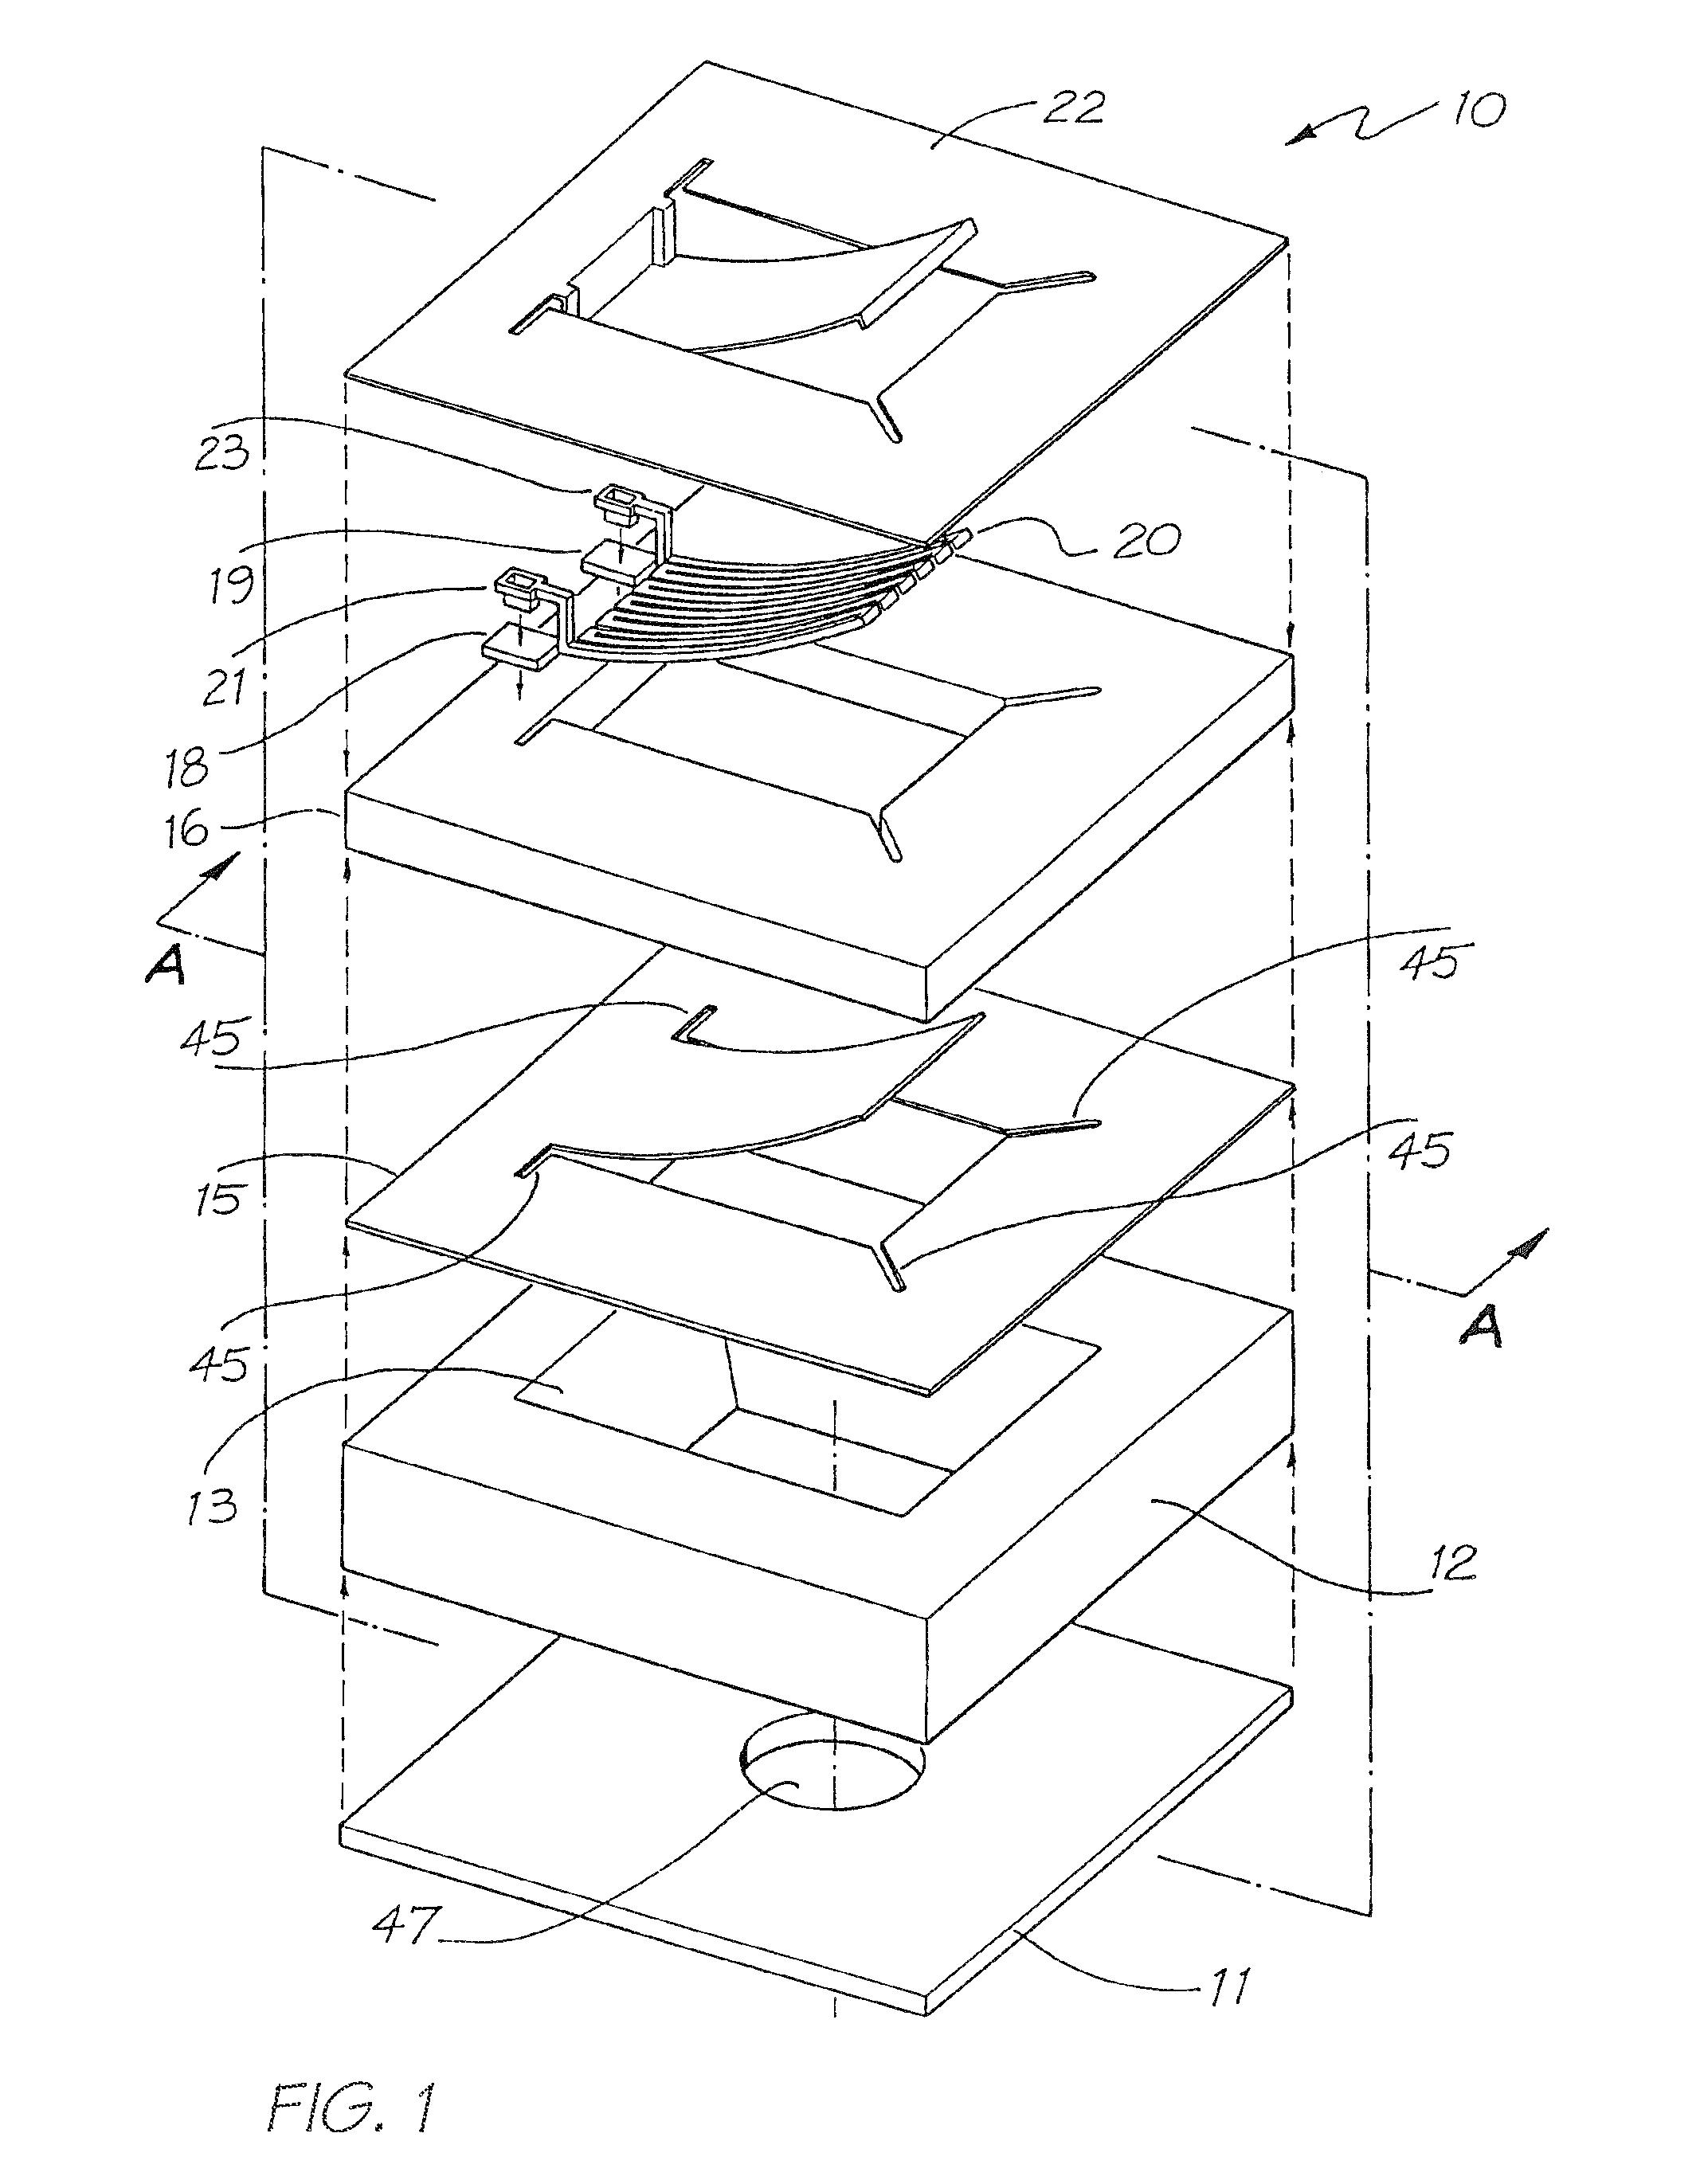 Printhead Integrated Circuit For Low Volume Droplet Ejection